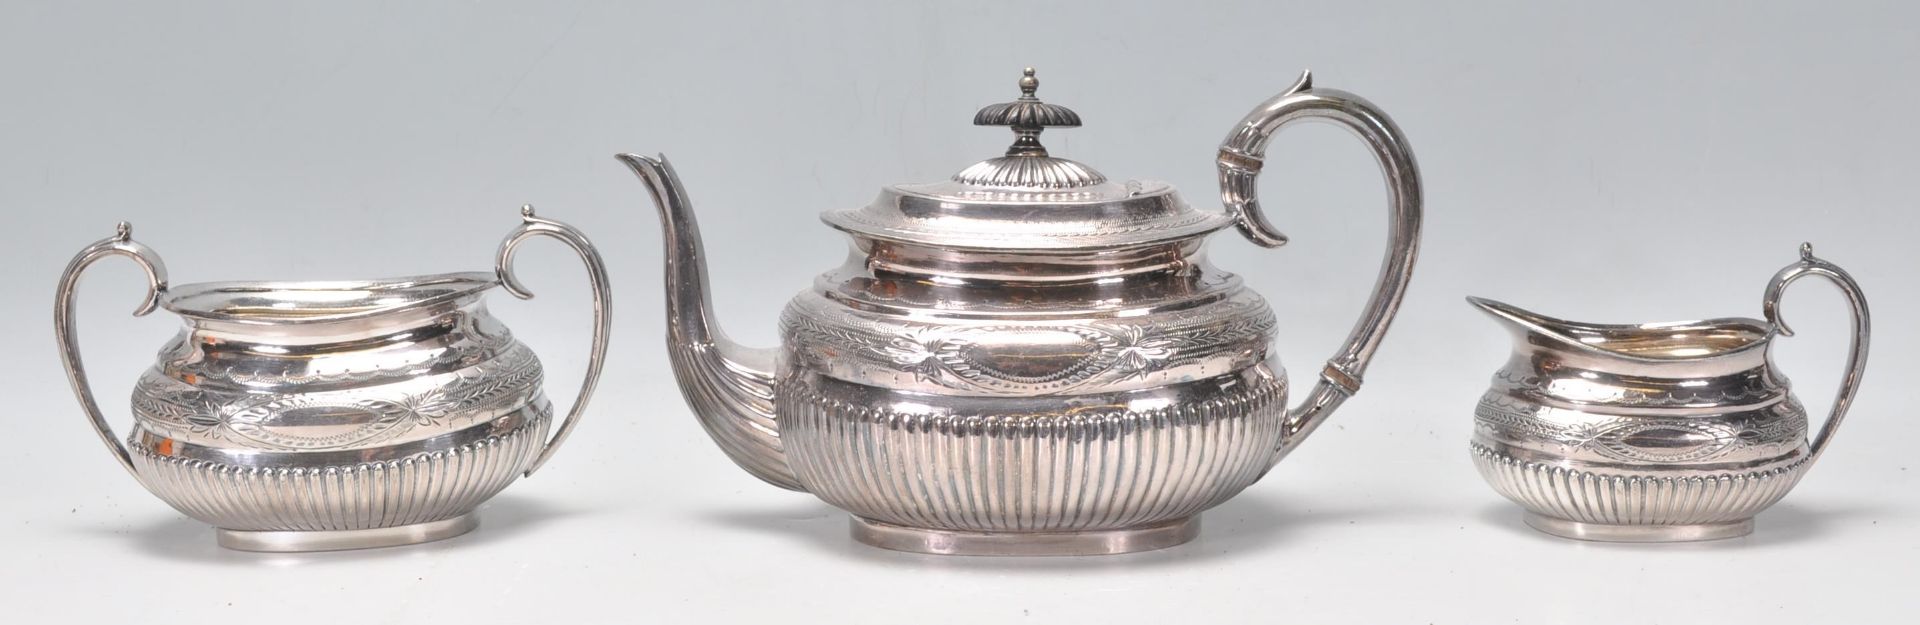 A late 19th century / early 20th century silver plate 3 tea service comprising teapot, sugar bowl - Image 6 of 11